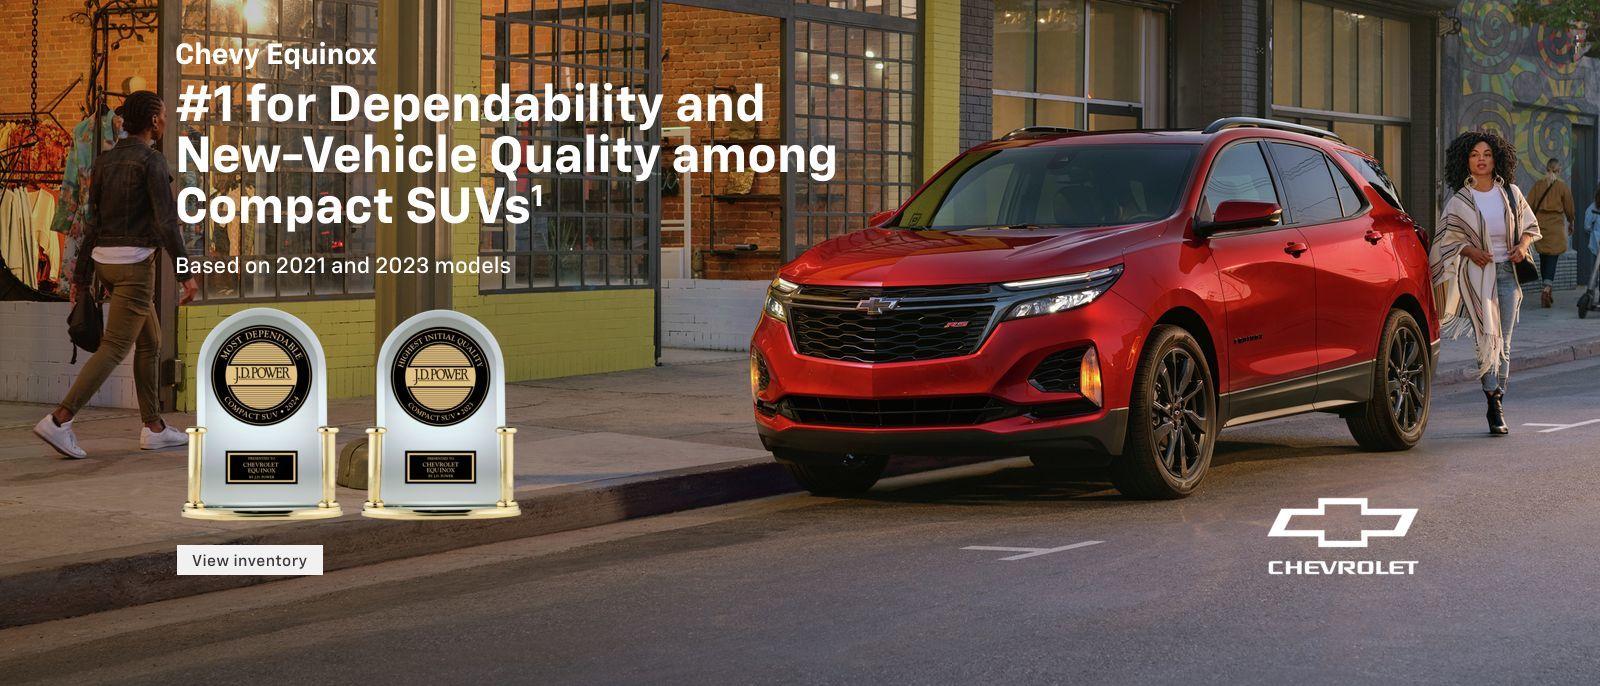 2024 Chevy Equinox. #1 for Dependability and New-Vehicle Quality among Compact SUVs